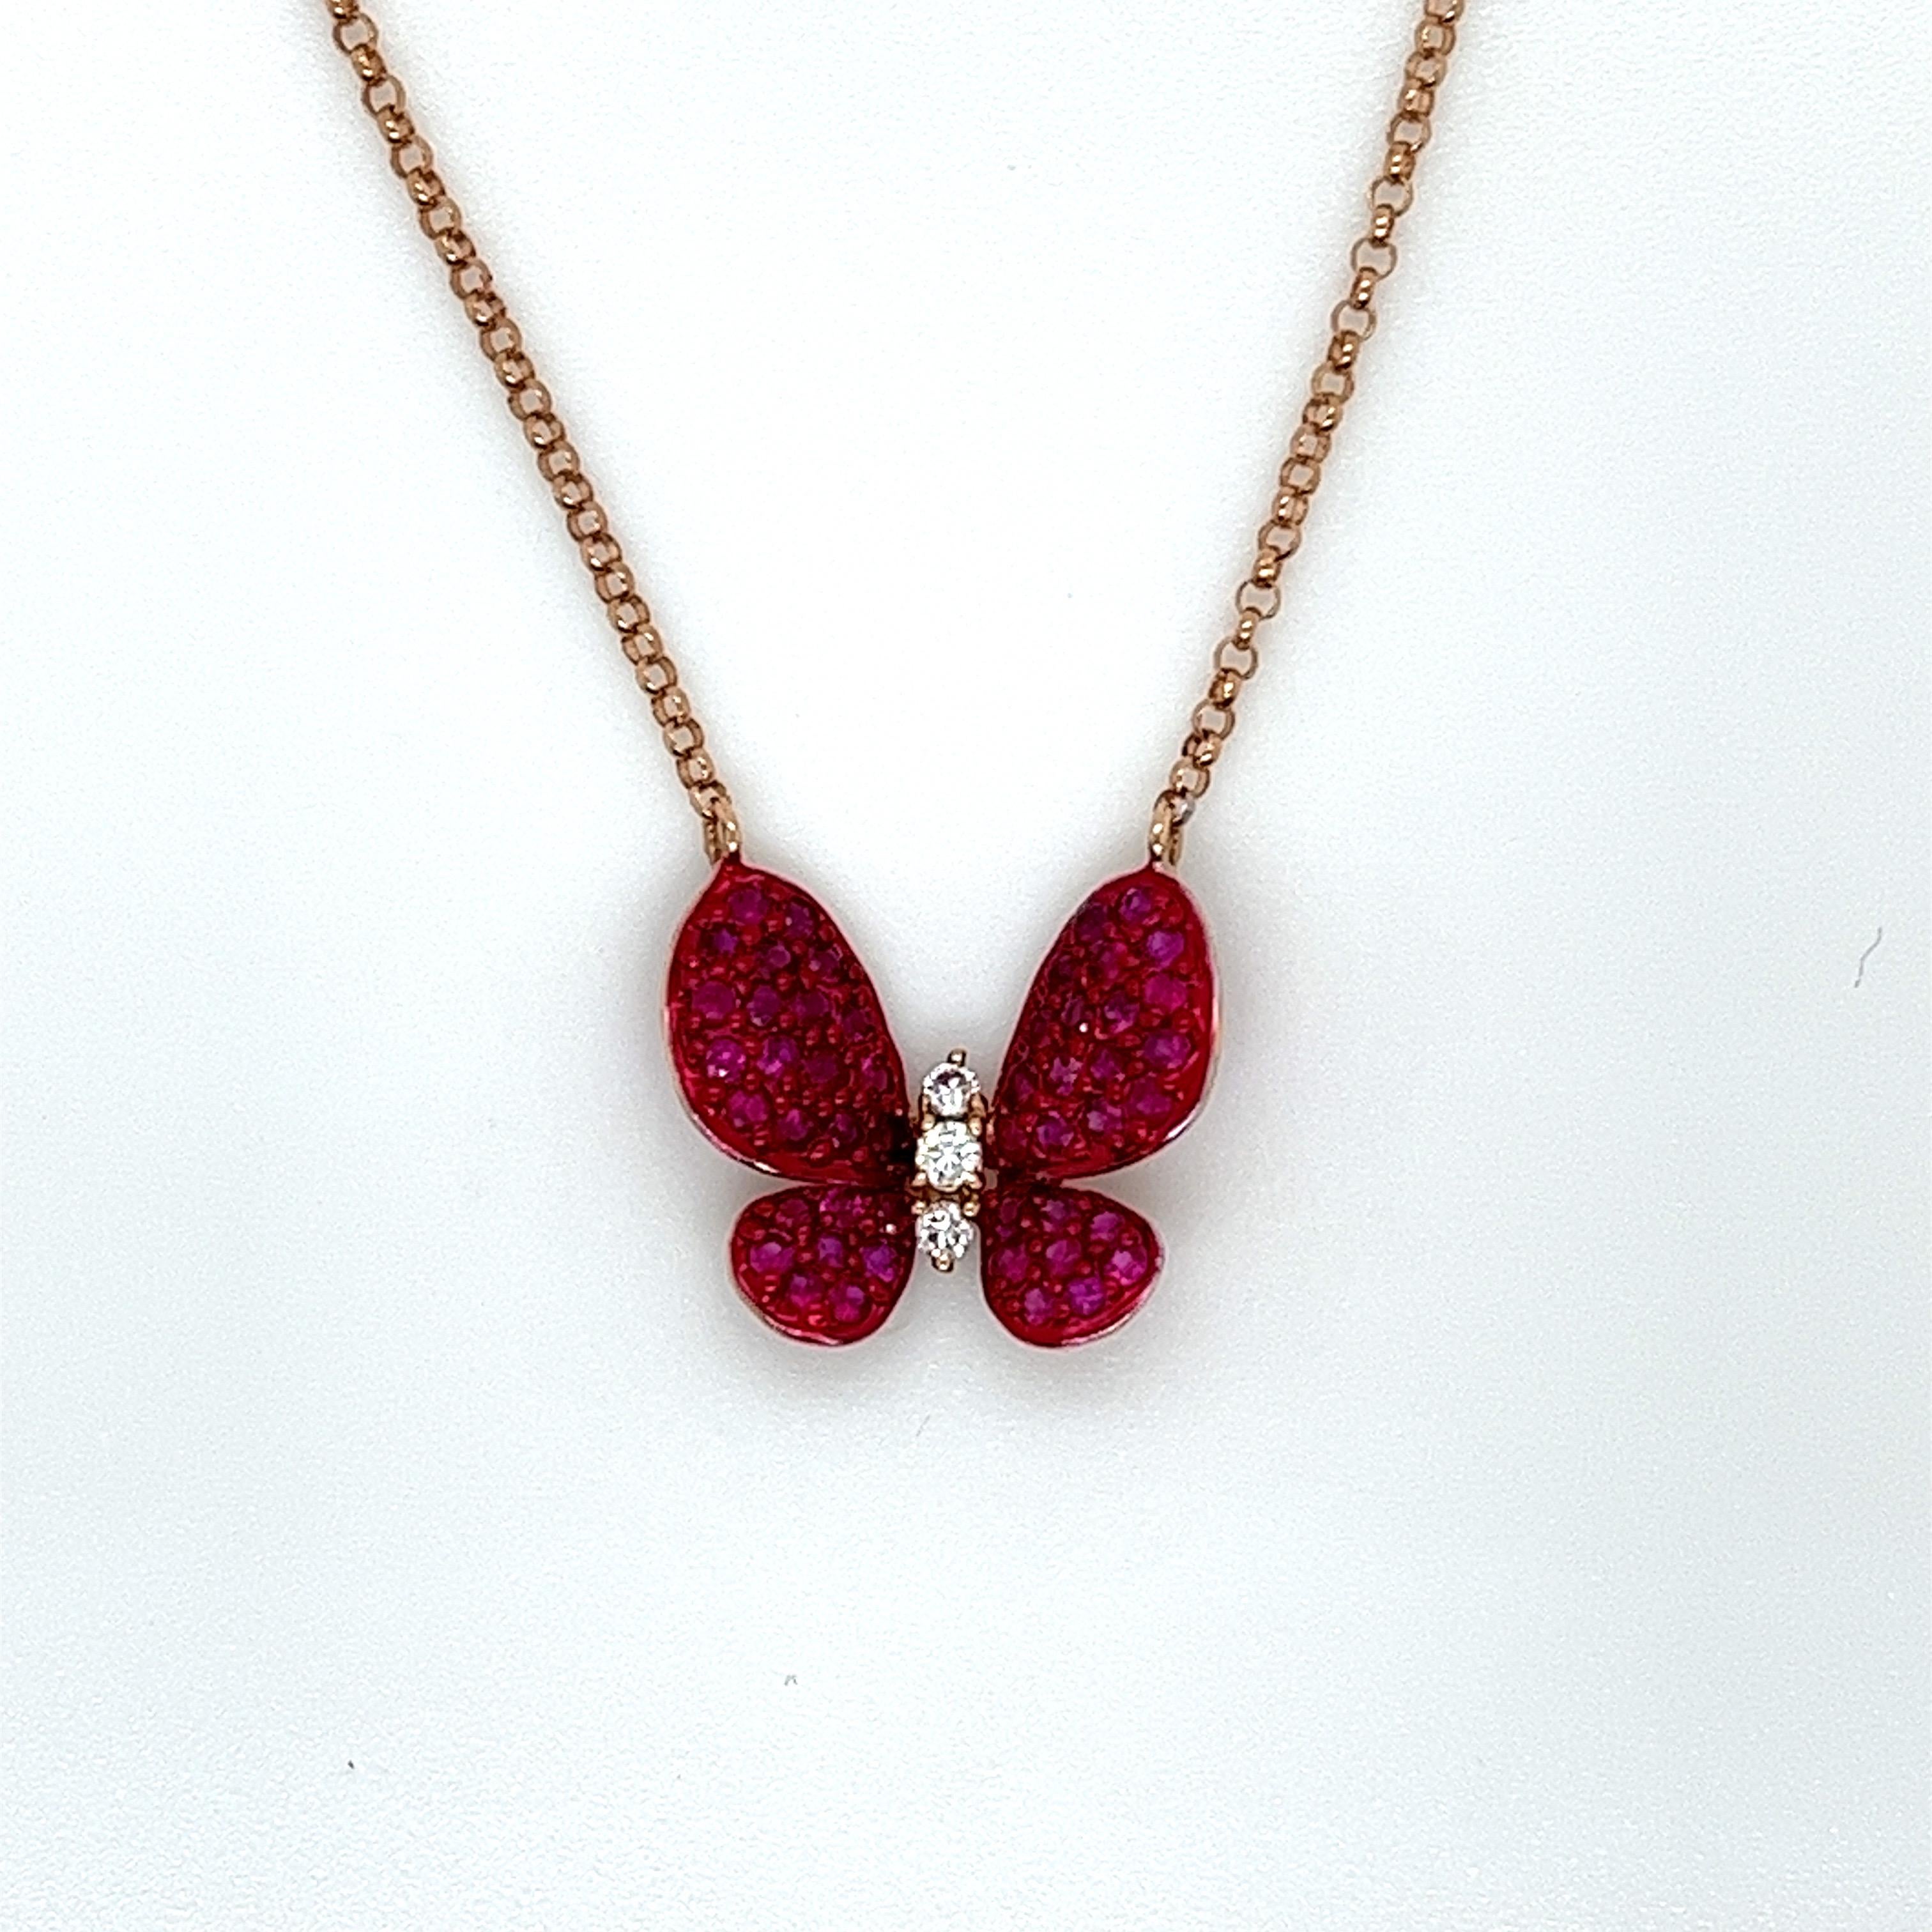 50 pieces of round rubies weighing .52 carats
3 pieces of diamonds weighing .05 carats
18 Karat Rose Gold chain measuring 18 inches
3.46 grams